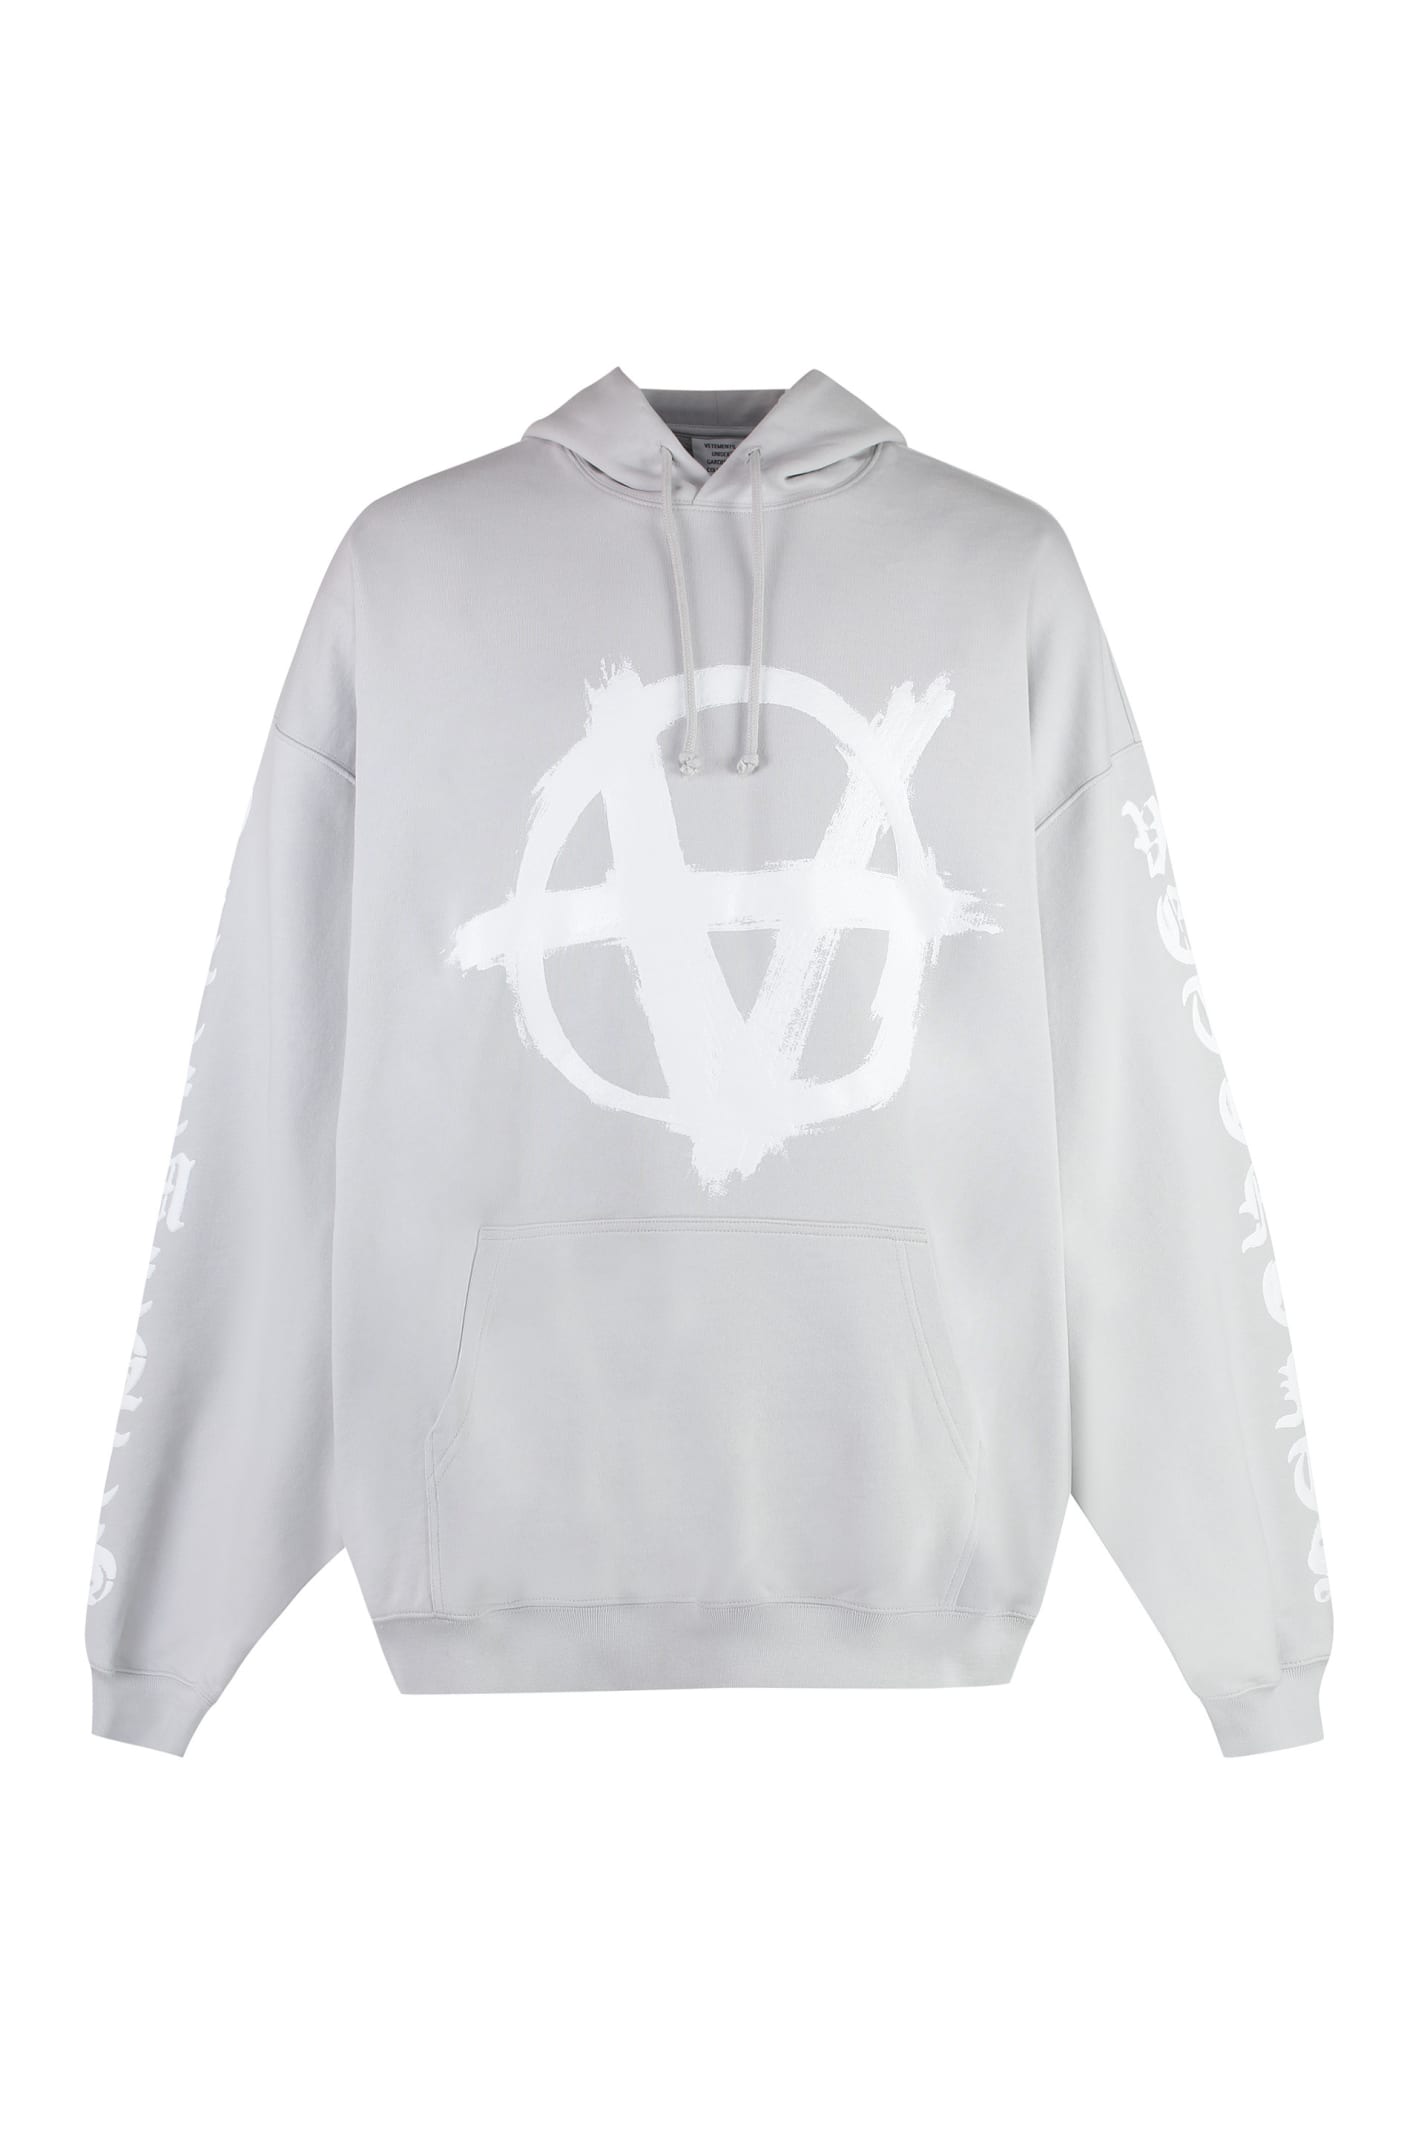 Reverse Anarchy Cotton Hoodie